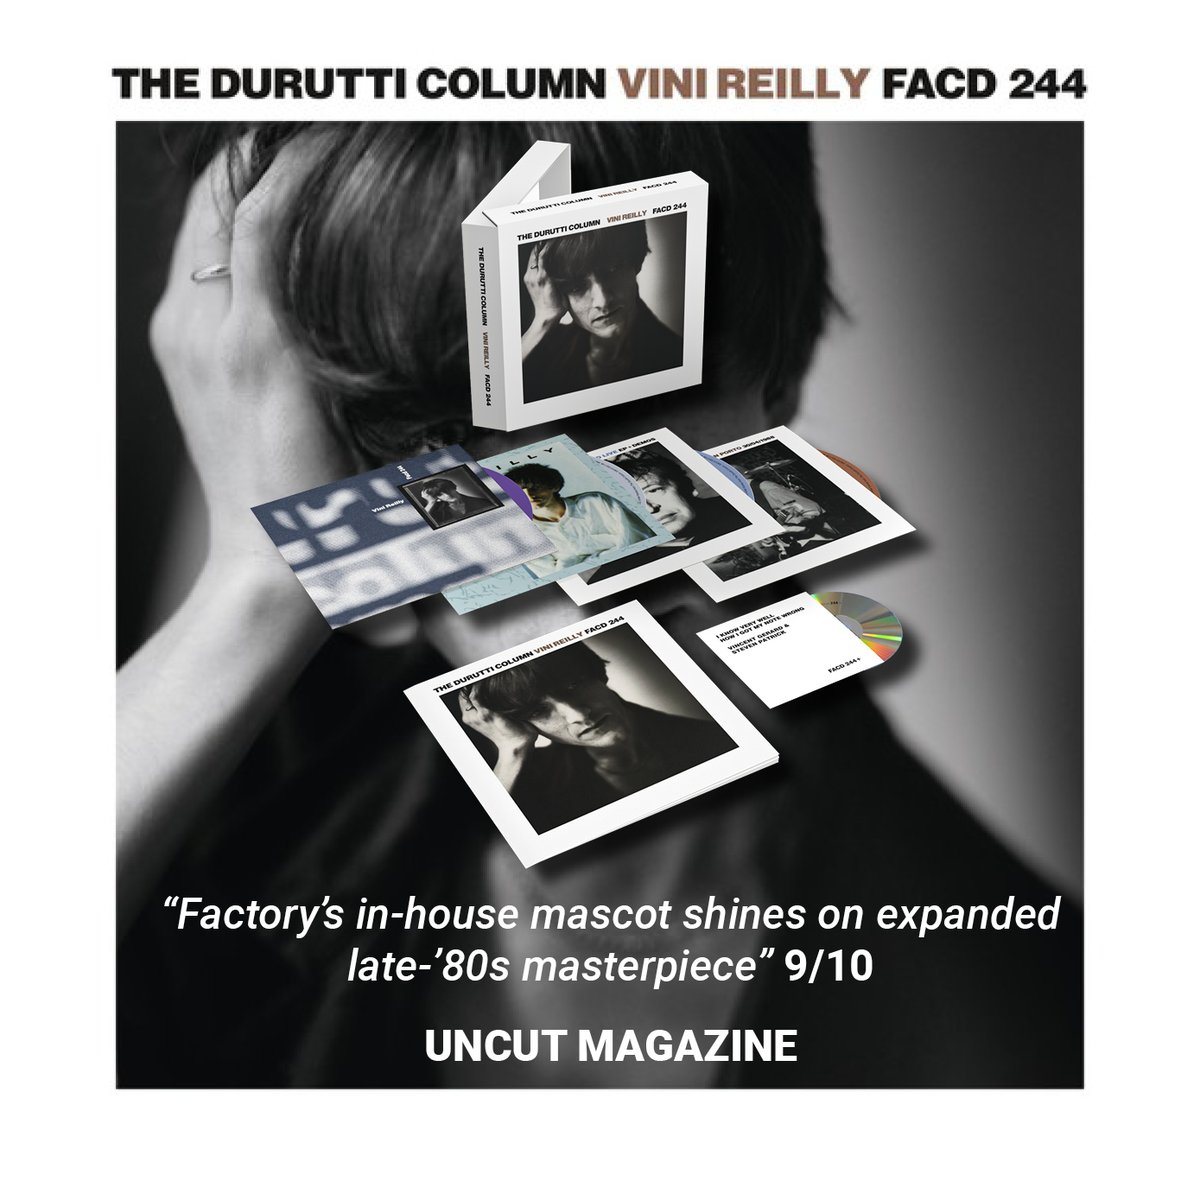 Brilliant 9/10 review from @uncutmagazine for the 35th-anniversary edition of Vini Reilly. Read the full review in their latest issue out now. ⭐️ Vini Reilly is released on 20th April, pre-order your copy: thedurutticolumn.lnk.to/vinireillytw #uncutmagazine #vinireilly #durutticolumn